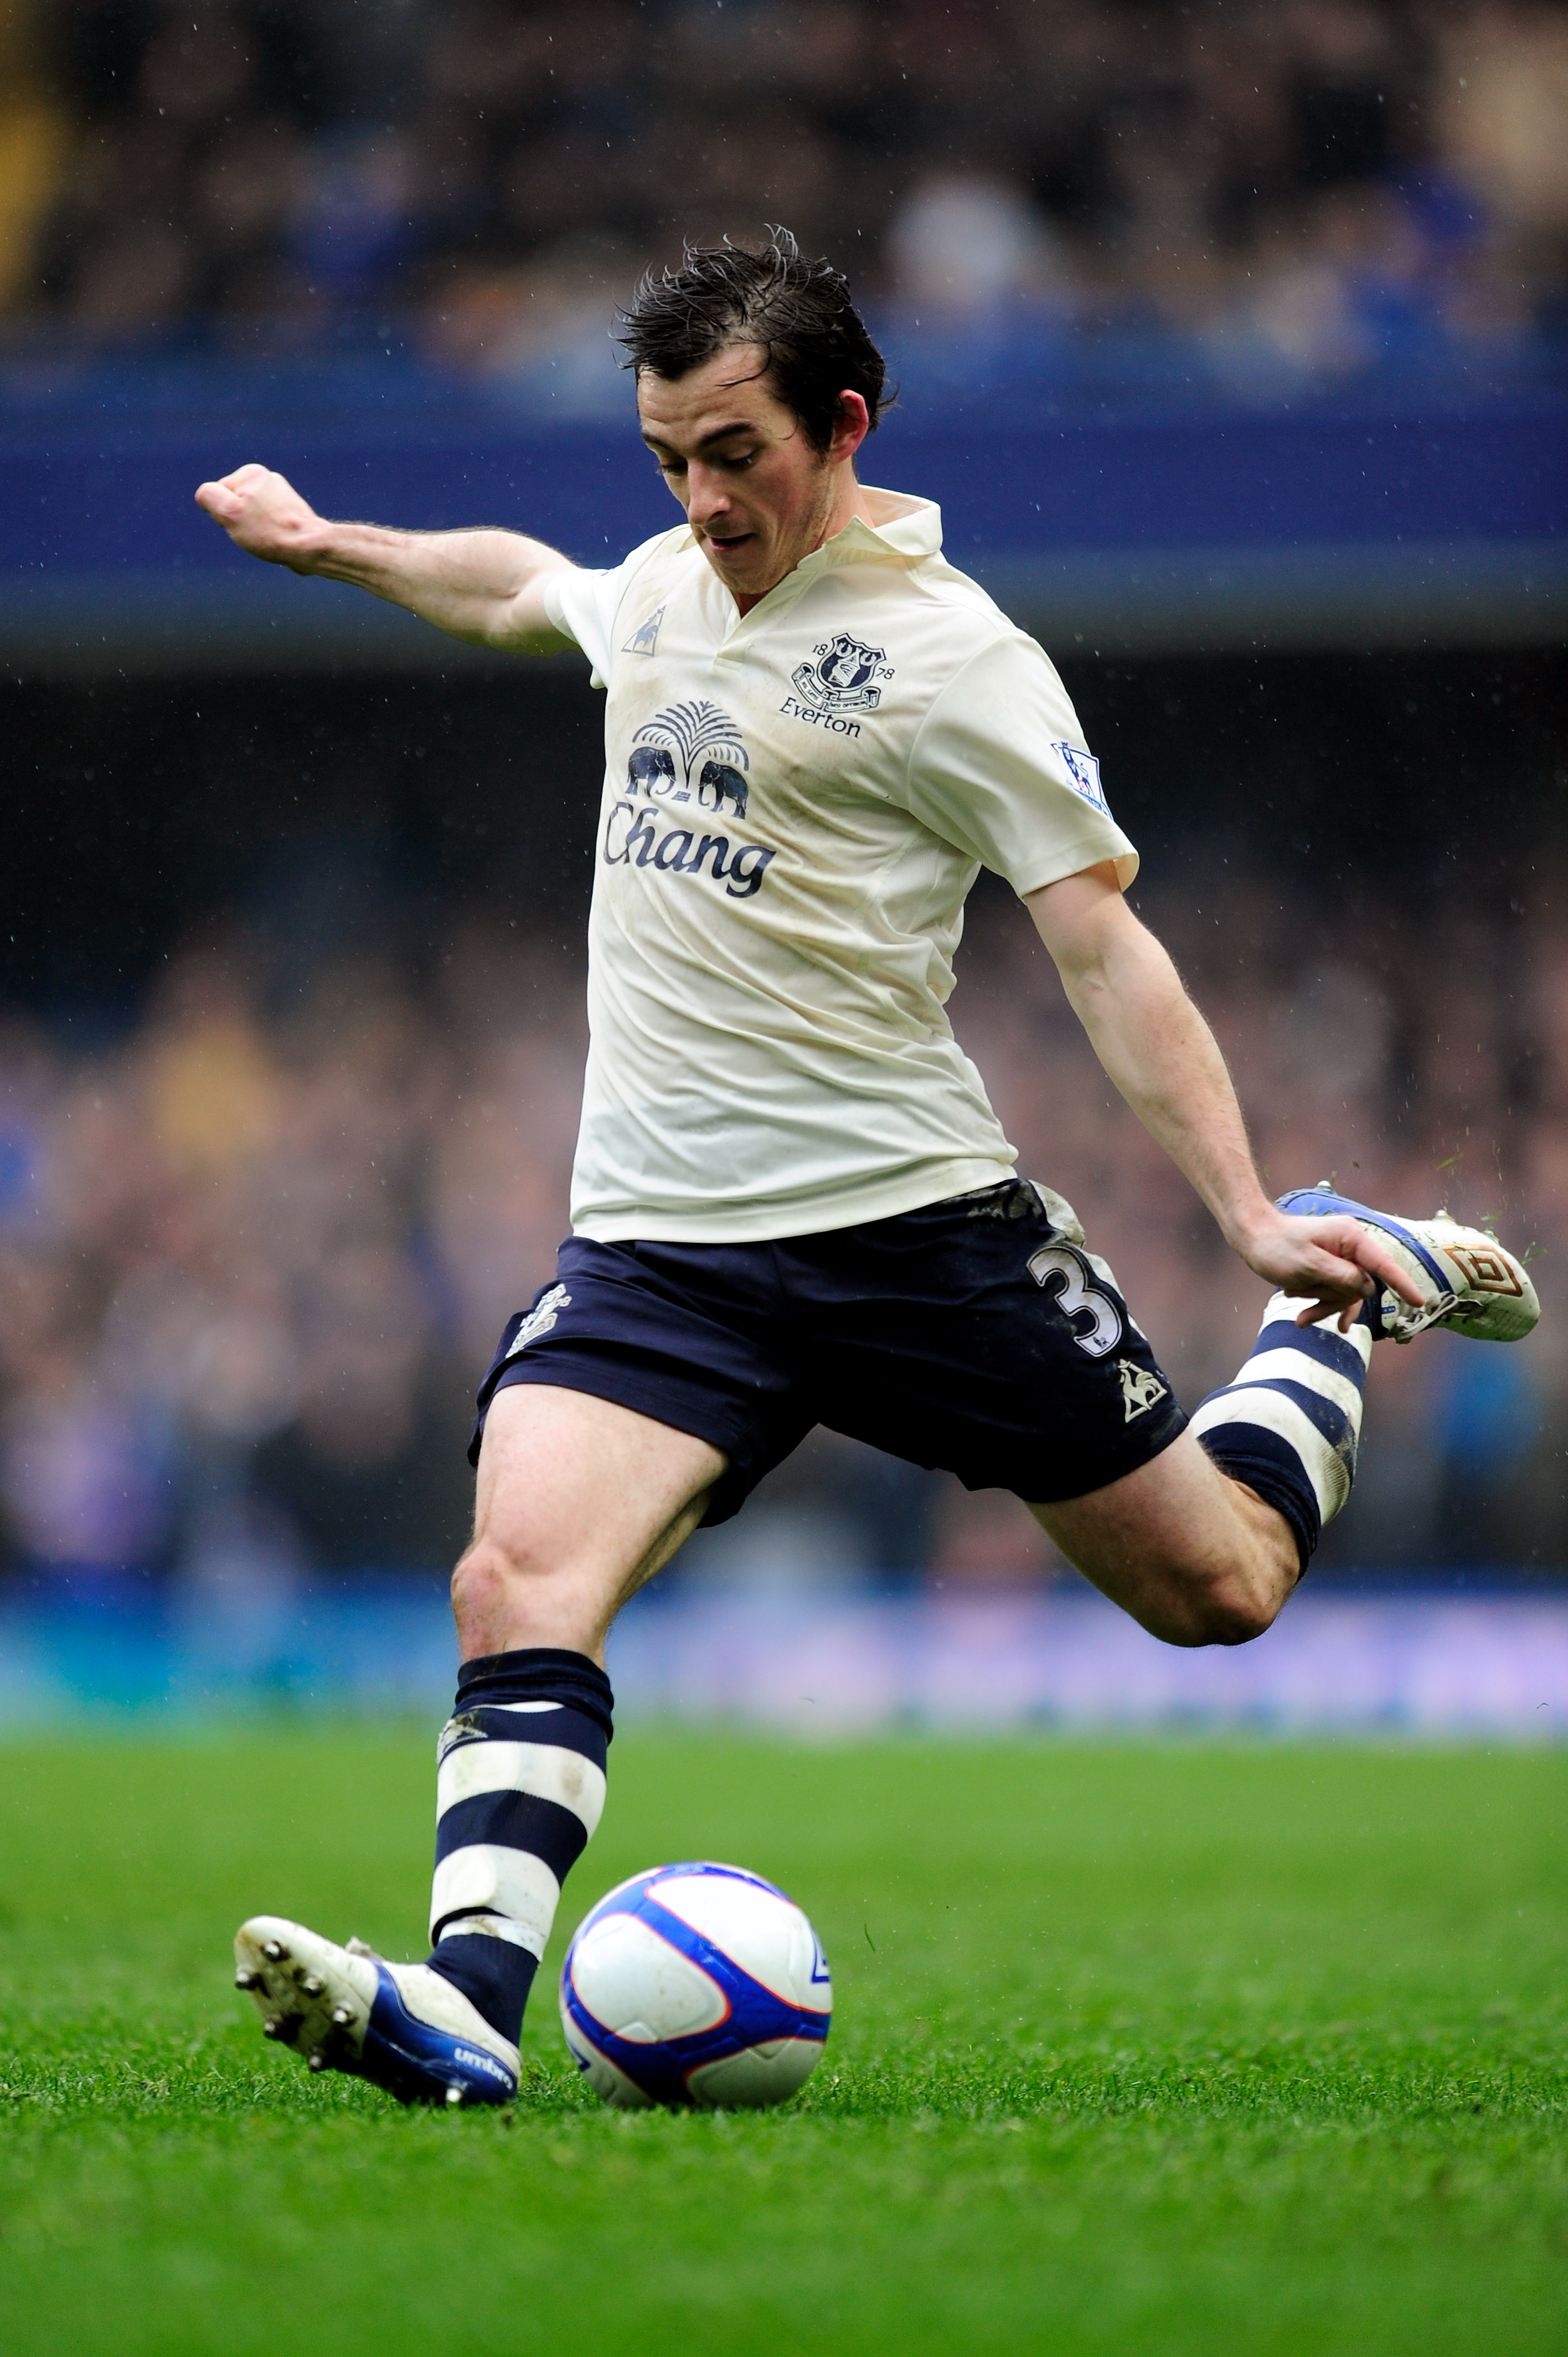 LONDON, ENGLAND - FEBRUARY 19:  Leighton Baines of Everton crosses the ball during the FA Cup sponsored by E.ON 4th round replay match between Chelsea and Everton at Stamford Bridge on February 19, 2011 in London, England.  (Photo by Jamie McDonald/Getty